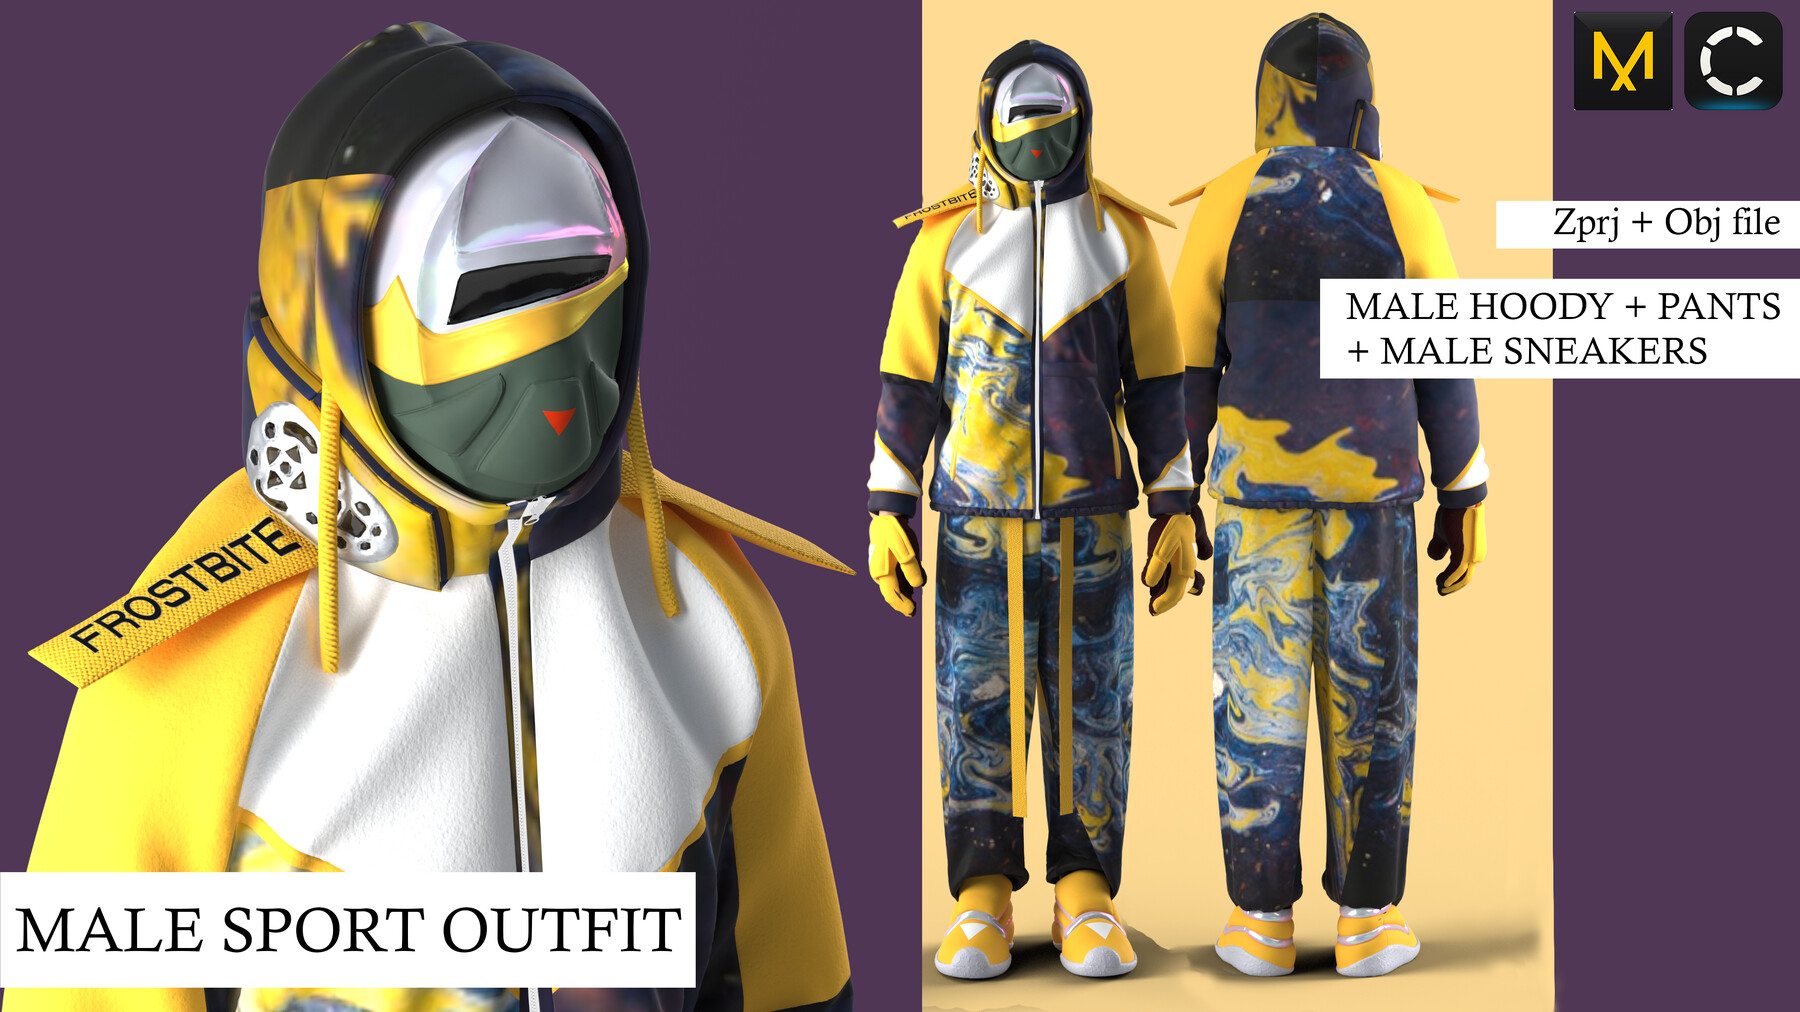 ArtStation - MALE SPORT OUTFIT | Game Assets